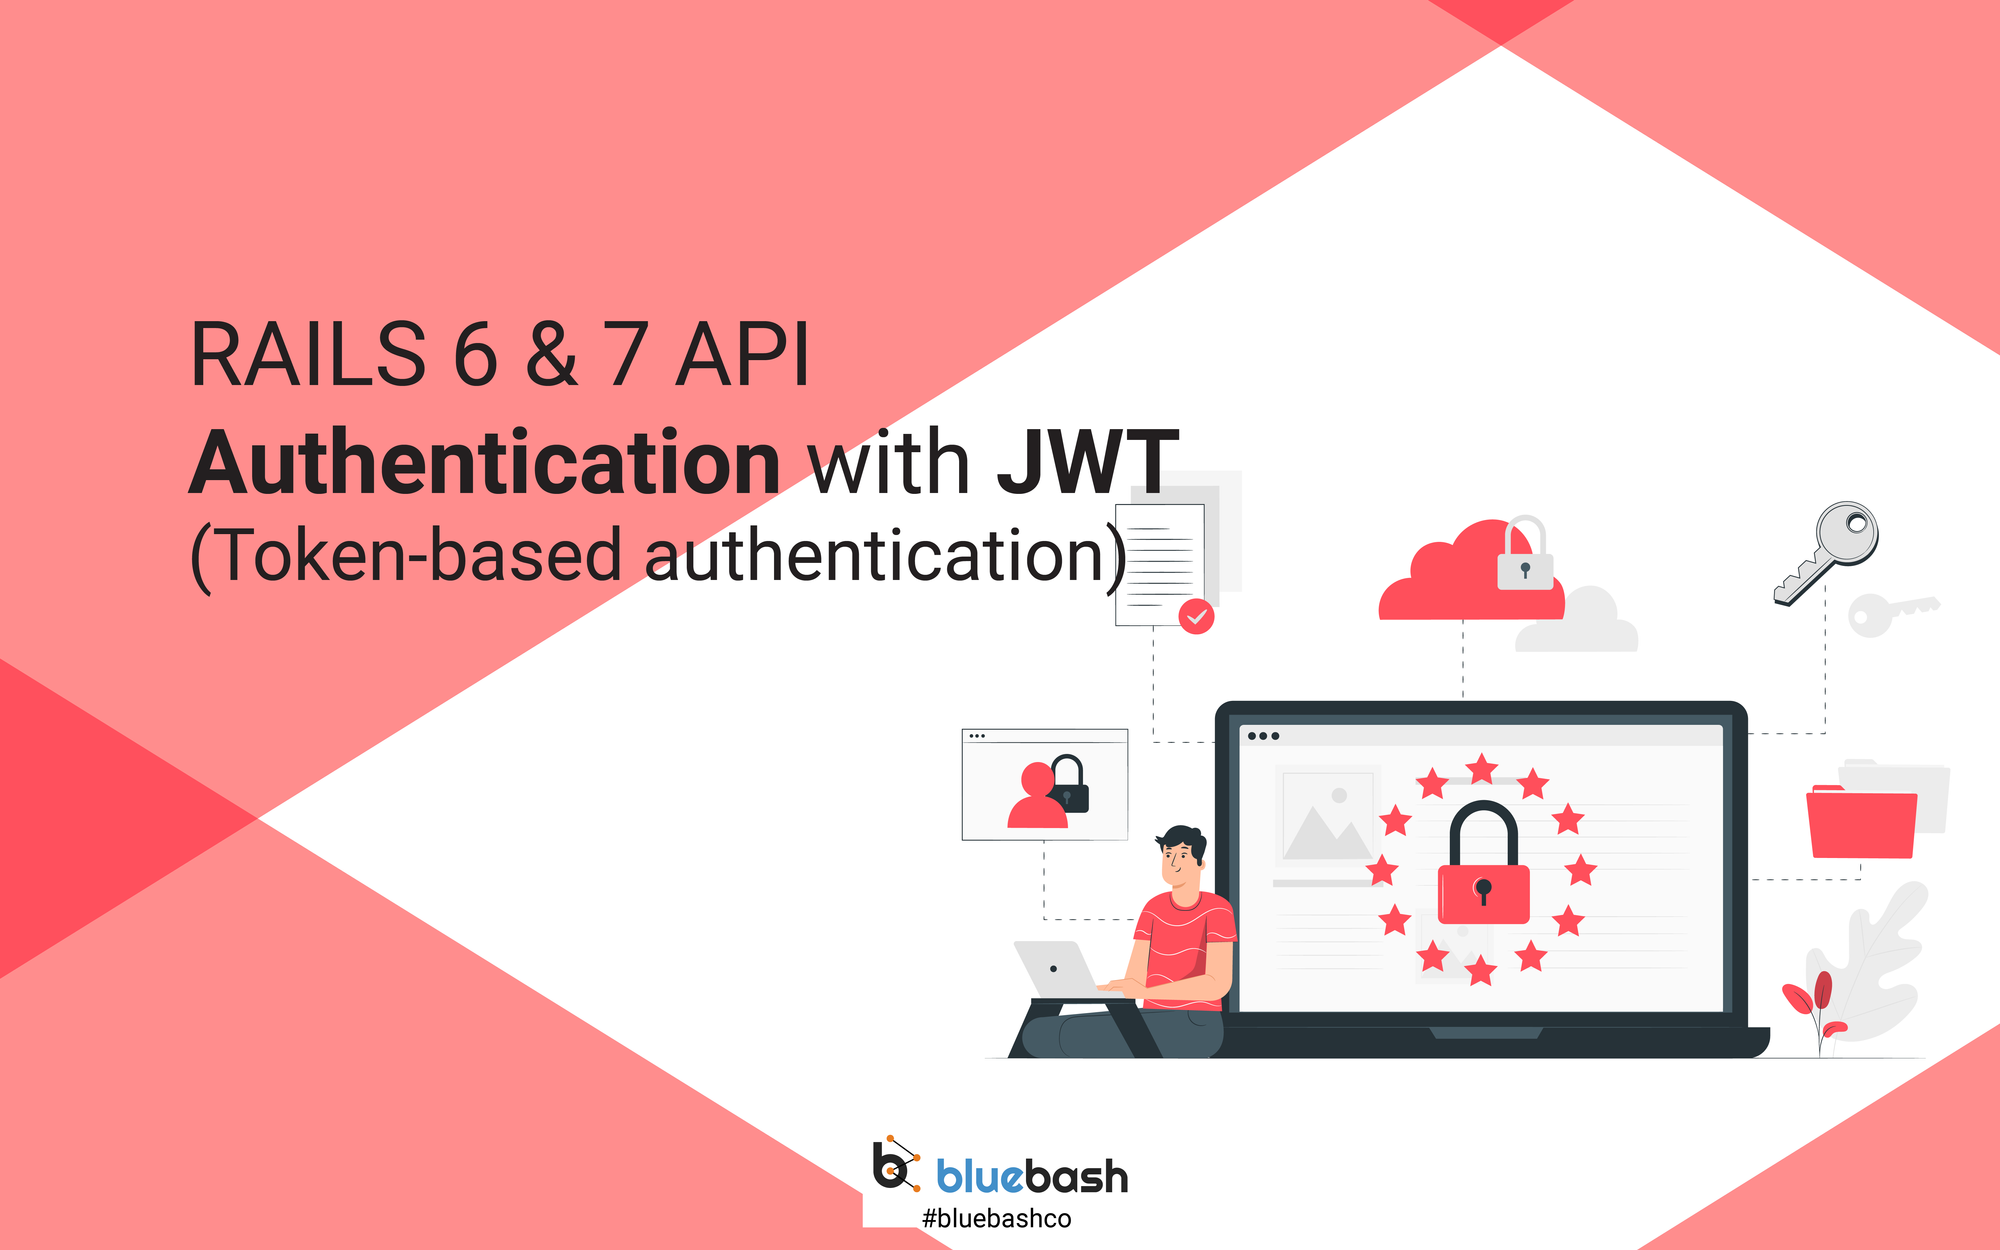 RAILS 6 & 7 API Authentication with JWT (Token-based authentication)